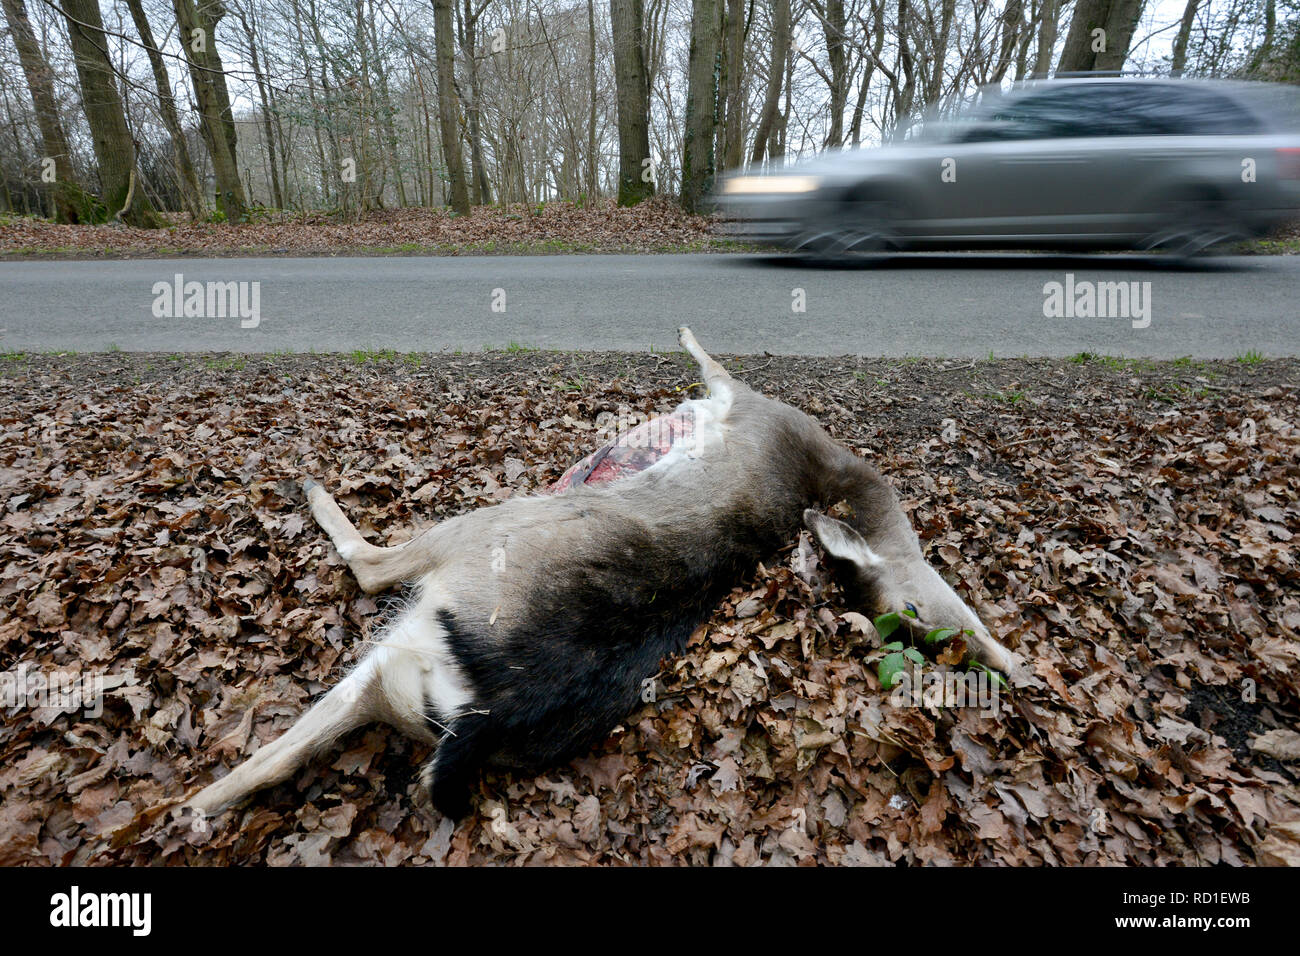 Roadkill roe deer by the side of a road. Stock Photo